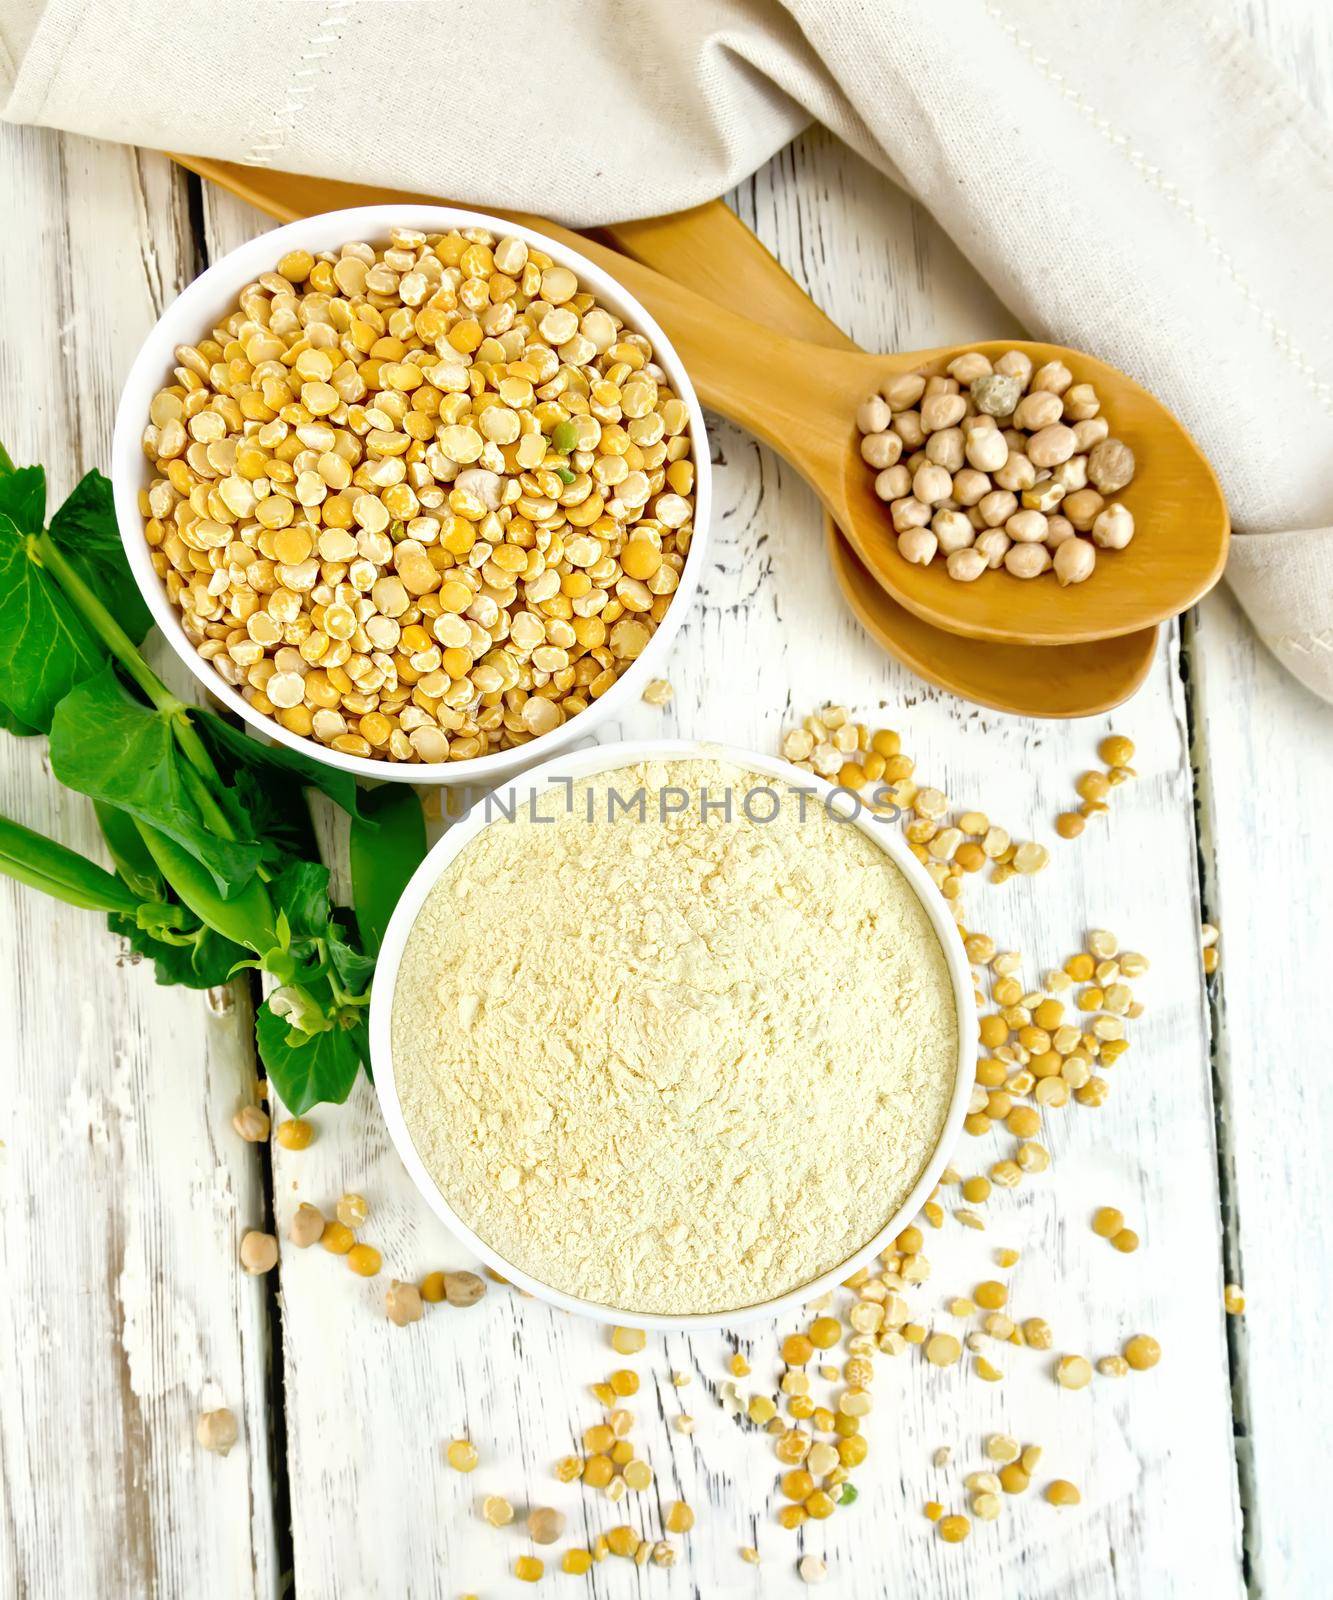 Flour pea and split pease in two white bowls, fresh pods and whole dry beans in the spoon on a background of the wooden planks on top